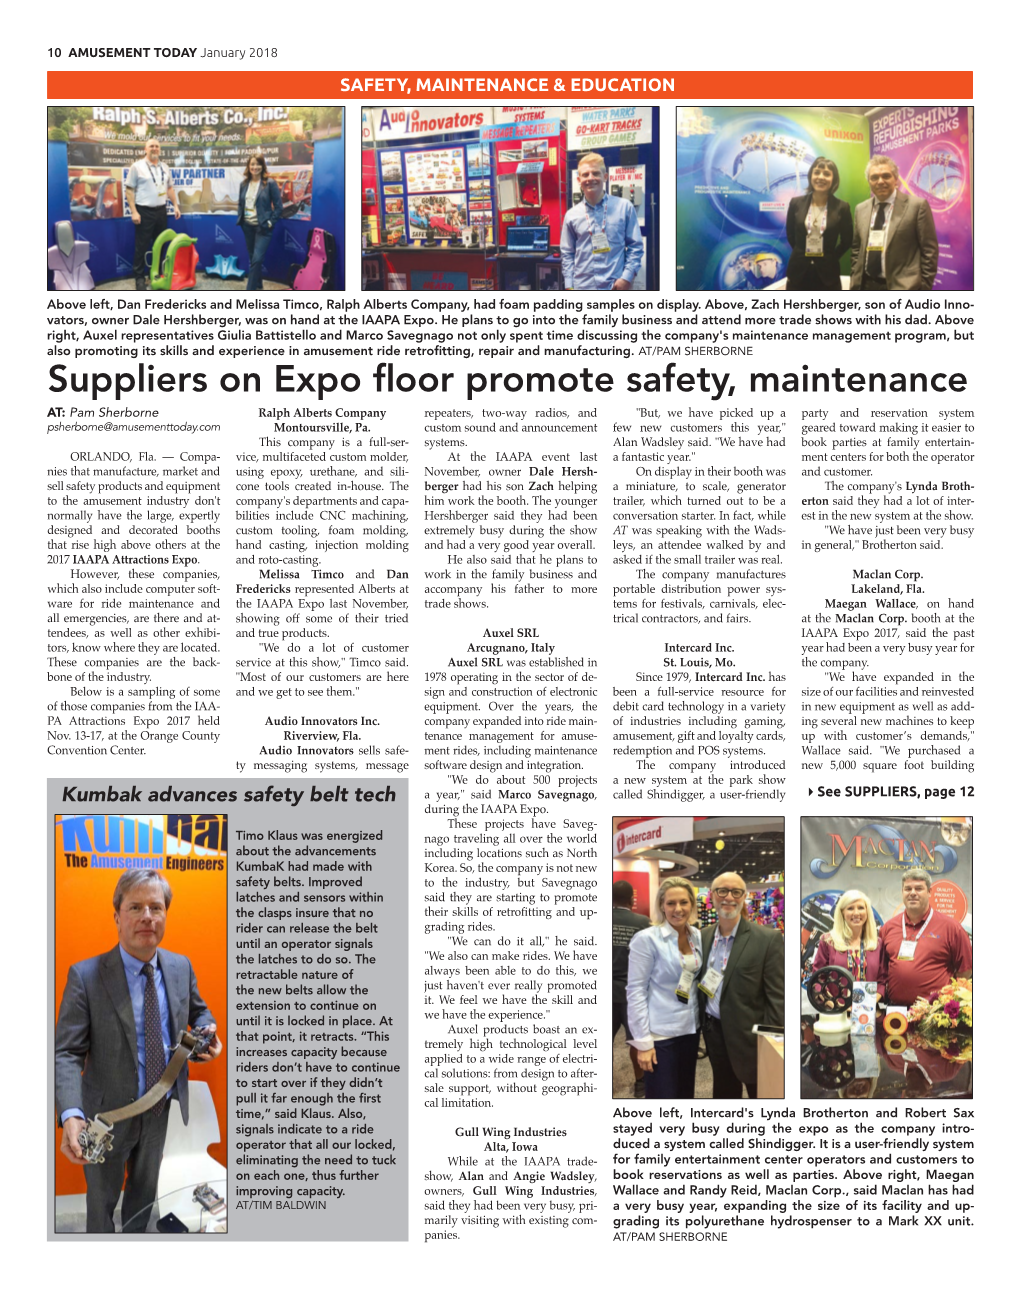 Suppliers on Expo Floor Promote Safety, Maintenance